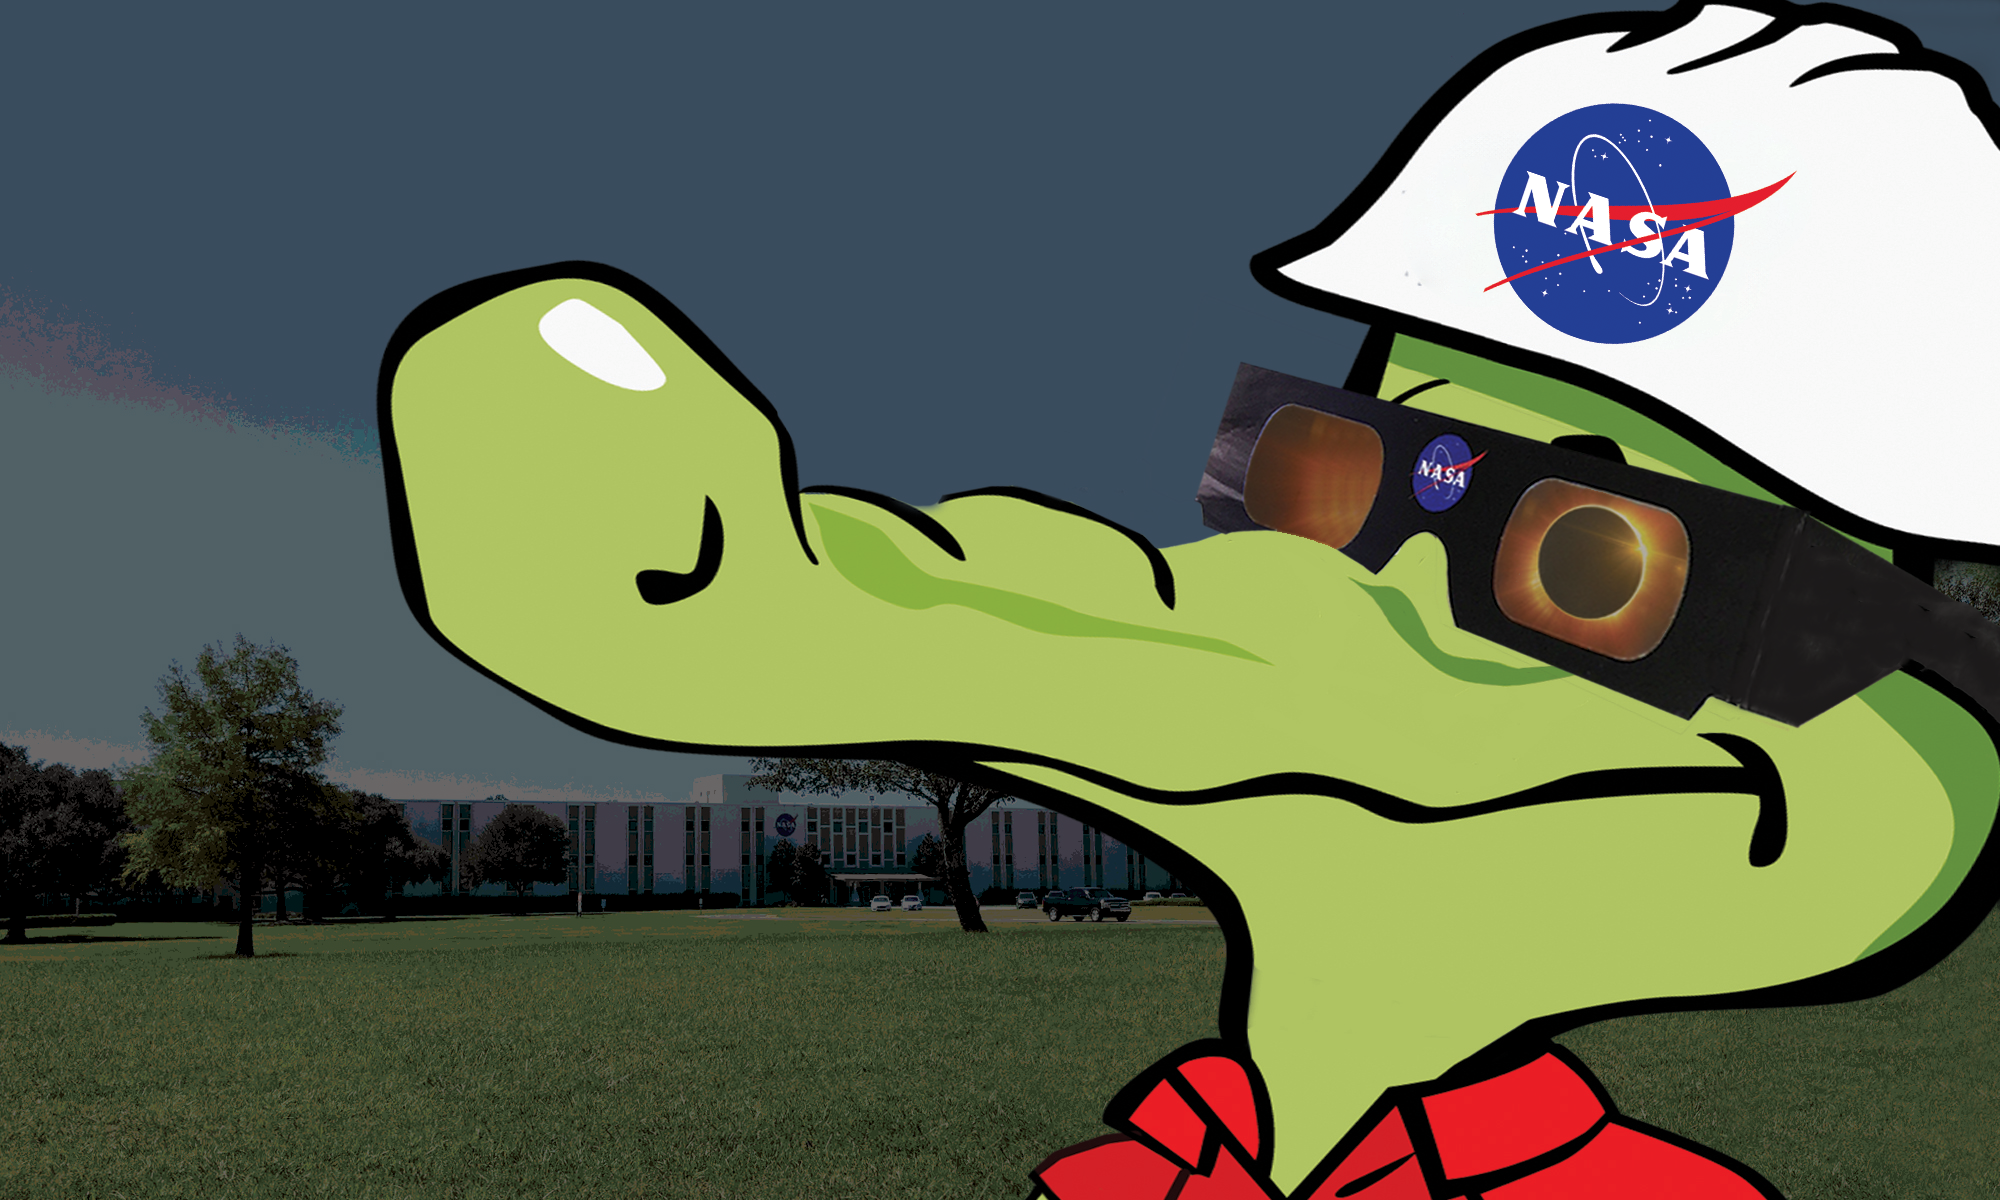 Gator experiencing a solar eclipse; the illustrated character is wearing a white hard hat and glasses